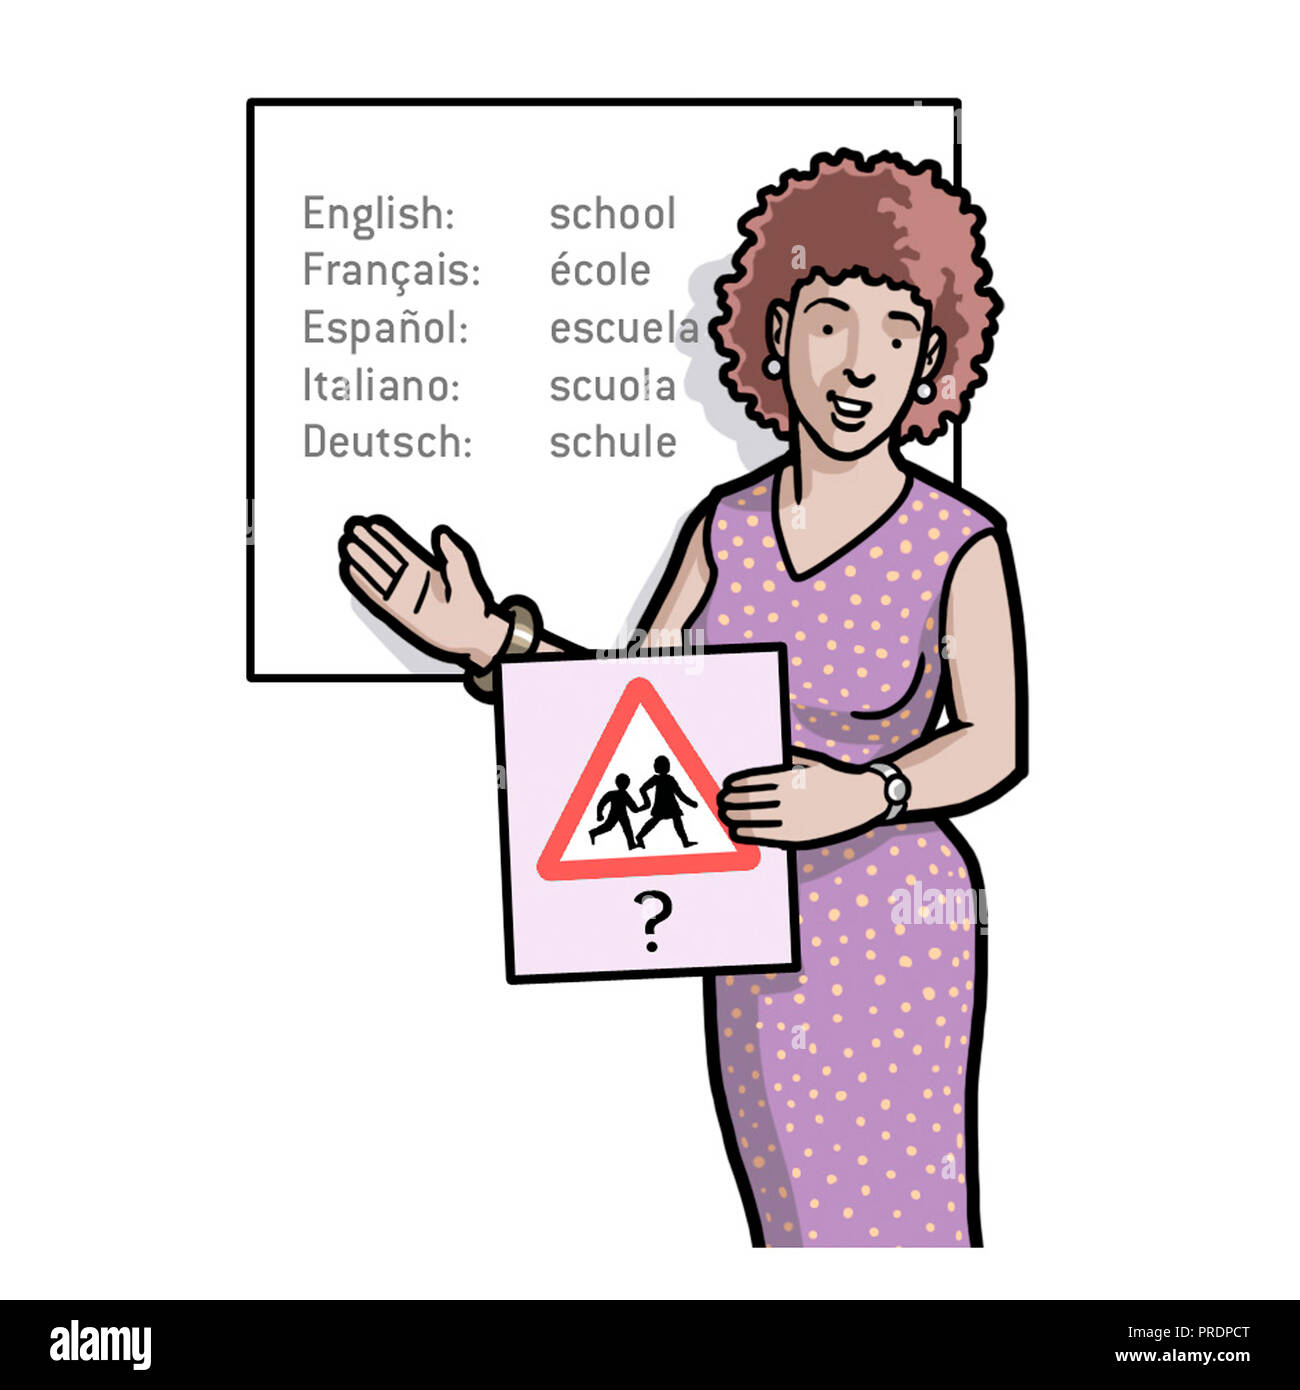 Female teacher showing road sign and word 'school' in different languages Stock Photo